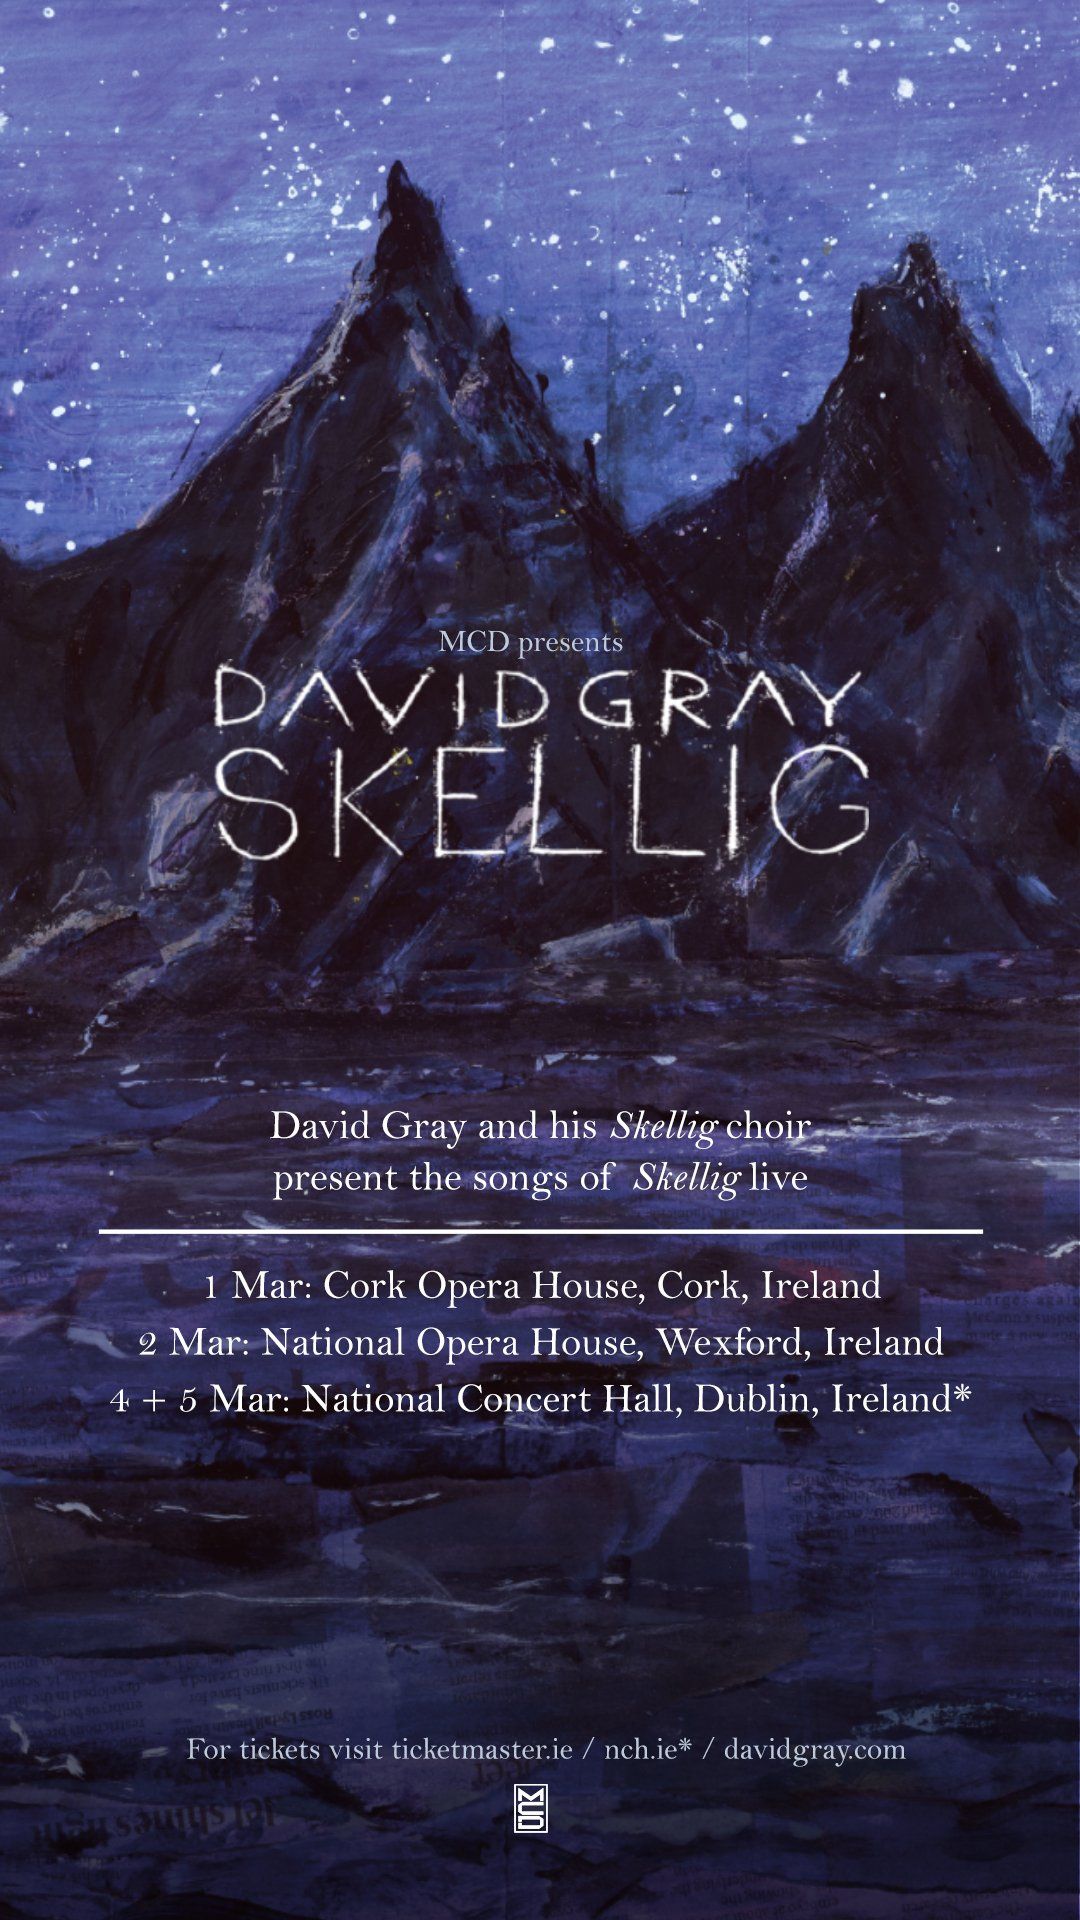 David Gray: Skellig   Irish Tour Dates Confirmed  Tickets On Sale This Friday at 10am